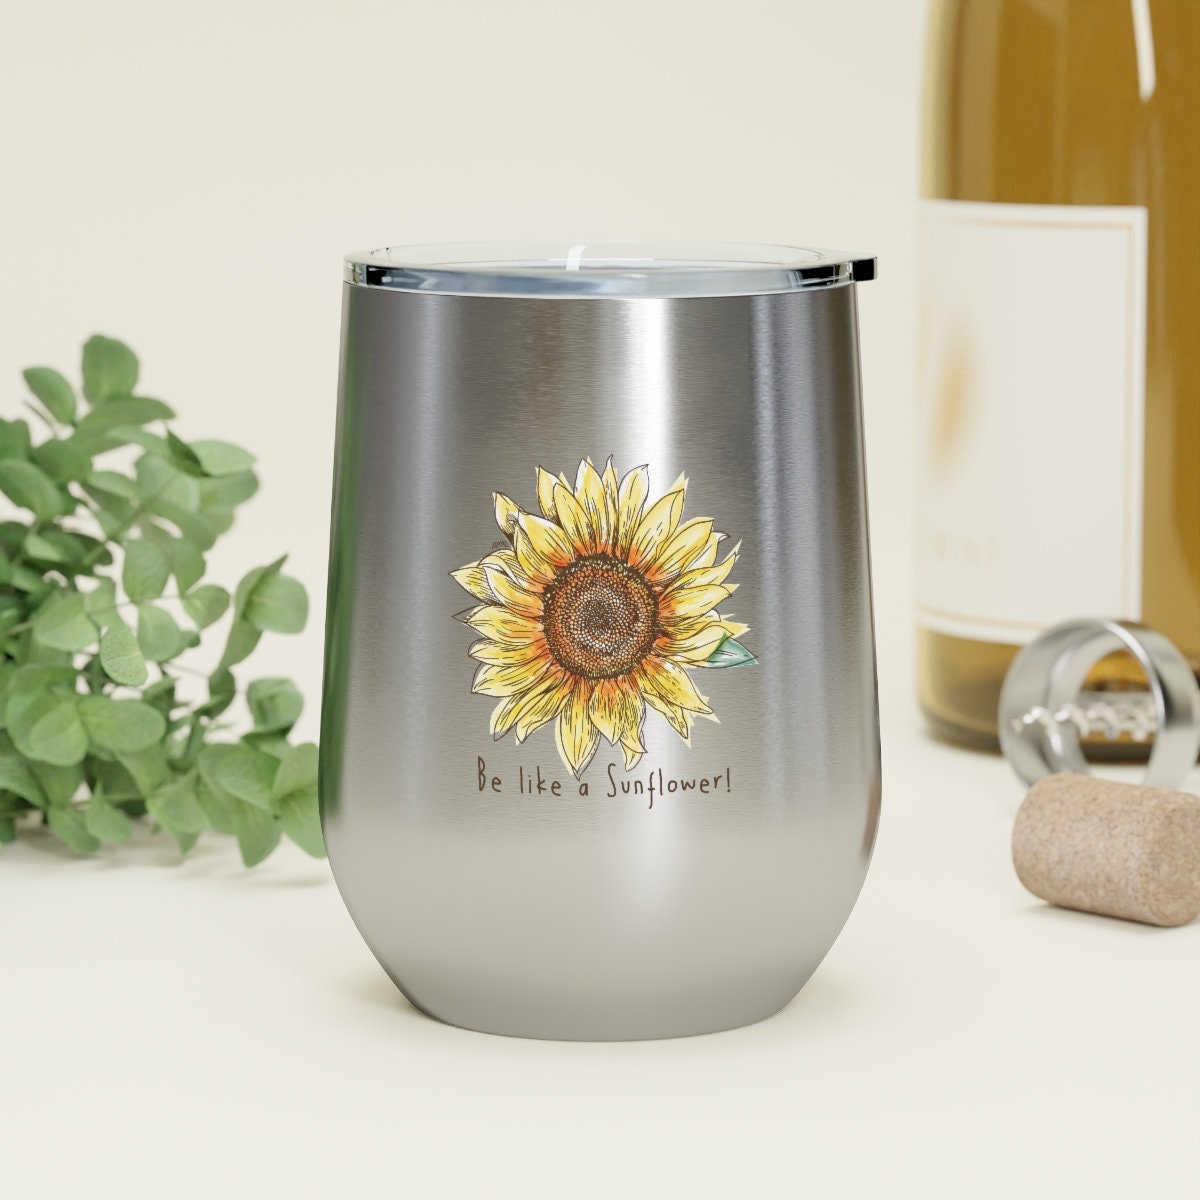 Sassy Wine Lover Gift I am the Storm Quote Sunflower White Stainless Steel Wine Tumbler 12 oz with Lid 